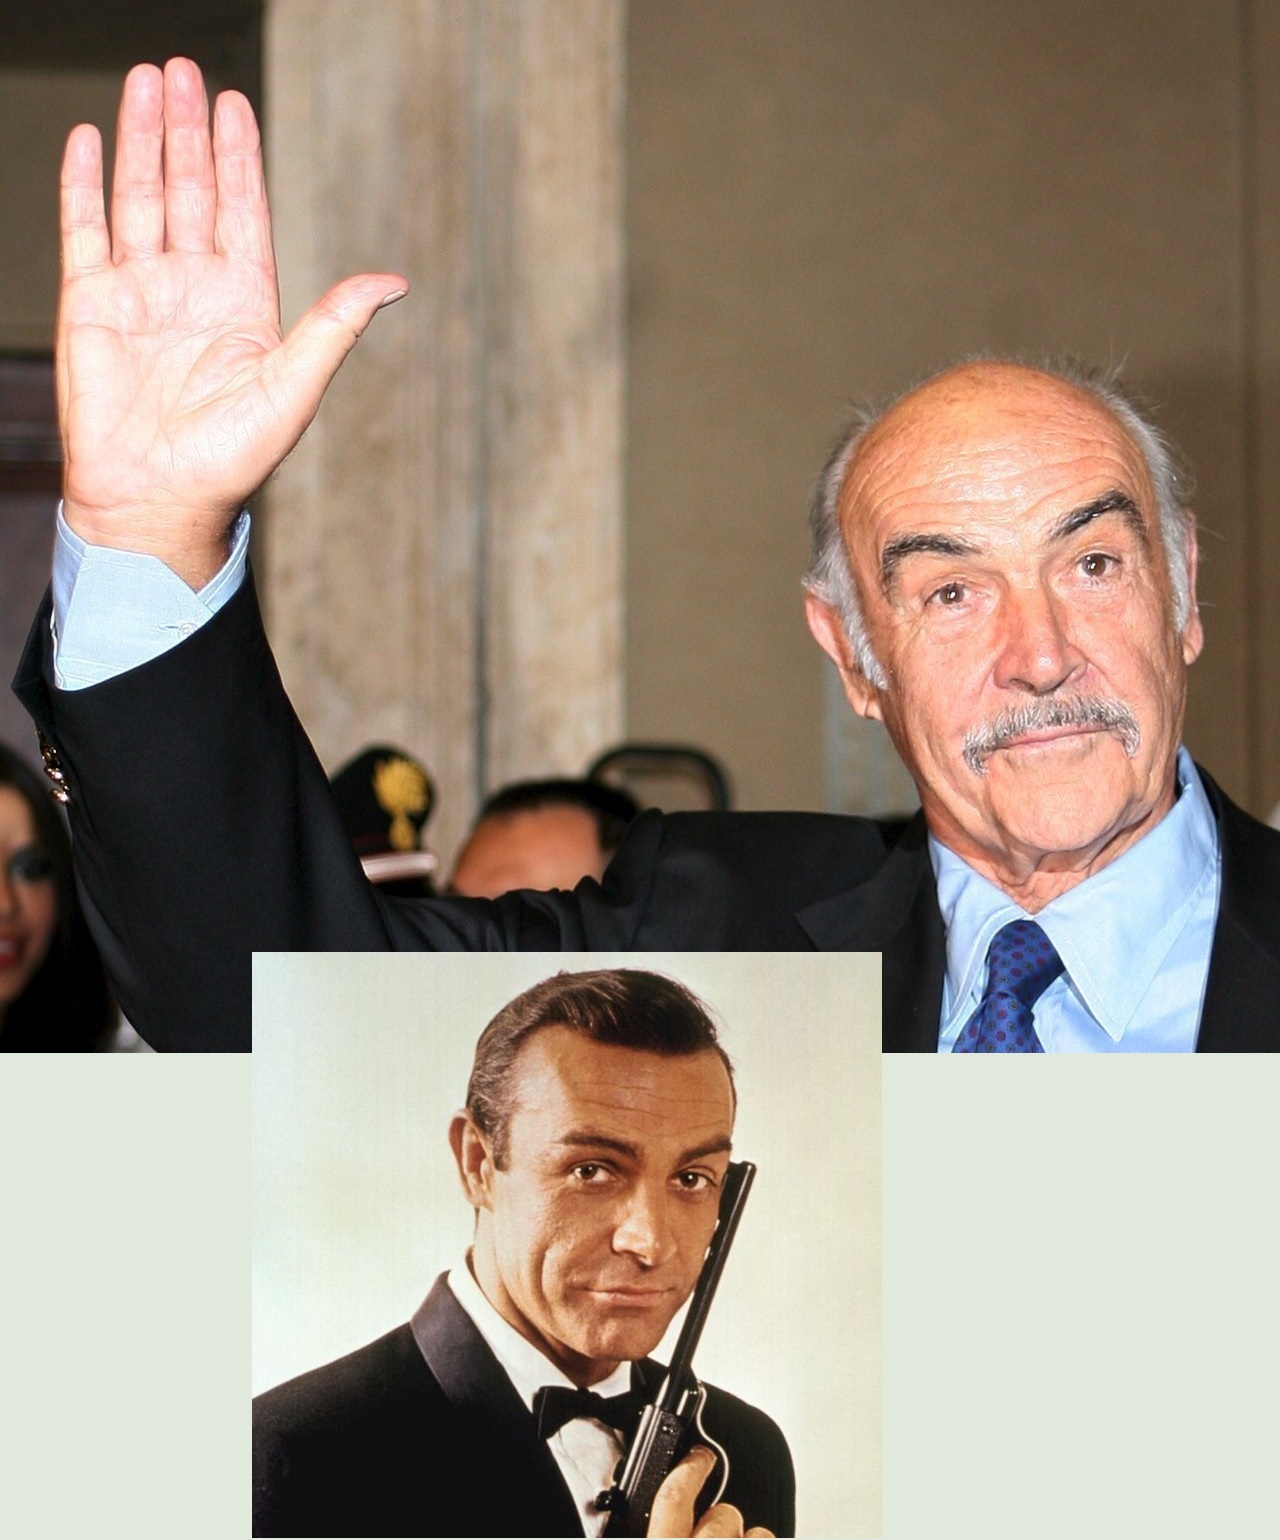 Sir Sean Connery 007:  25 August 1930 - 31 October 2020